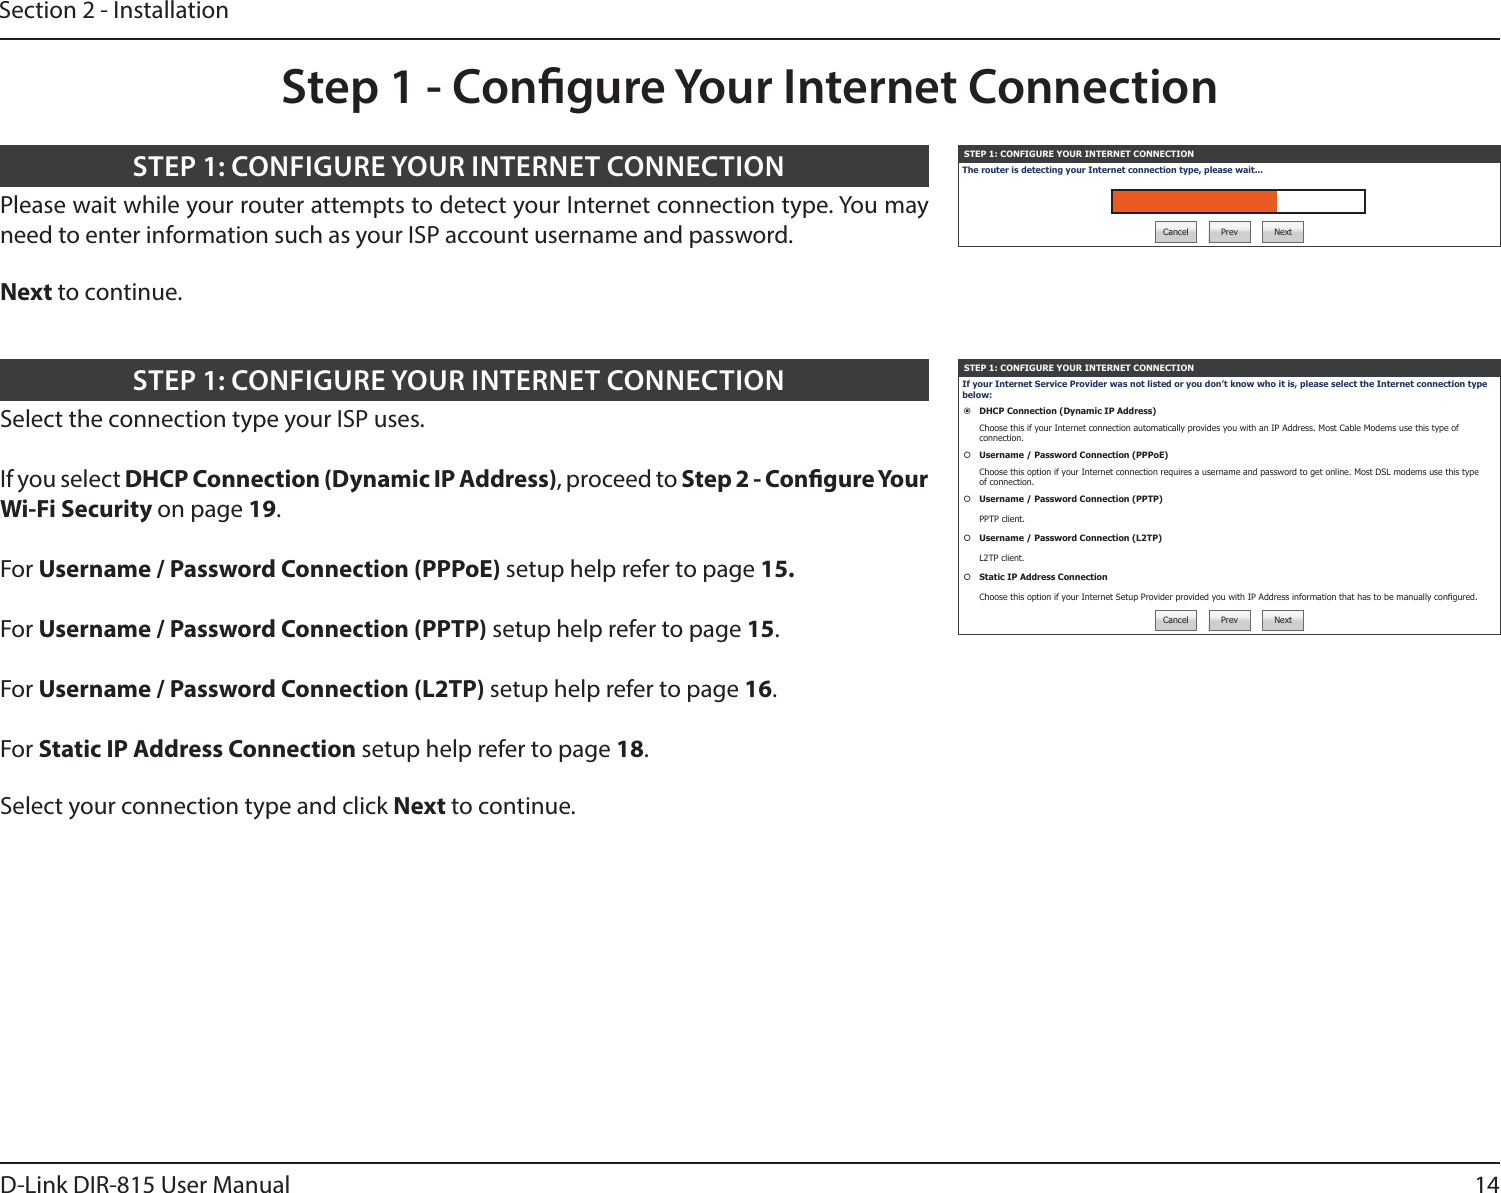 14D-Link DIR-815 User ManualSection 2 - InstallationSTEP 1: CONFIGURE YOUR INTERNET CONNECTIONThe router is detecting your Internet connection type, please wait...Cancel Prev NextPlease wait while your router attempts to detect your Internet connection type. You may need to enter information such as your ISP account username and password.Next to continue.STEP 1: CONFIGURE YOUR INTERNET CONNECTIONStep 1 - Congure Your Internet ConnectionSTEP 1: CONFIGURE YOUR INTERNET CONNECTIONIf your Internet Service Provider was not listed or you don’t know who it is, please select the Internet connection type below:DHCP Connection (Dynamic IP Address)Choose this if your Internet connection automatically provides you with an IP Address. Most Cable Modems use this type of connection.Username / Password Connection (PPPoE)Choose this option if your Internet connection requires a username and password to get online. Most DSL modems use this type of connection.Username / Password Connection (PPTP)PPTP client.Username / Password Connection (L2TP)L2TP client.Static IP Address ConnectionChoose this option if your Internet Setup Provider provided you with IP Address information that has to be manually congured.Cancel Prev NextSelect the connection type your ISP uses.If you select DHCP Connection (Dynamic IP Address), proceed to Step 2 - Congure Your Wi-Fi Security on page 19.For Username / Password Connection (PPPoE) setup help refer to page 15.For Username / Password Connection (PPTP) setup help refer to page 15.For Username / Password Connection (L2TP) setup help refer to page 16.For Static IP Address Connection setup help refer to page 18.Select your connection type and click Next to continue.STEP 1: CONFIGURE YOUR INTERNET CONNECTION